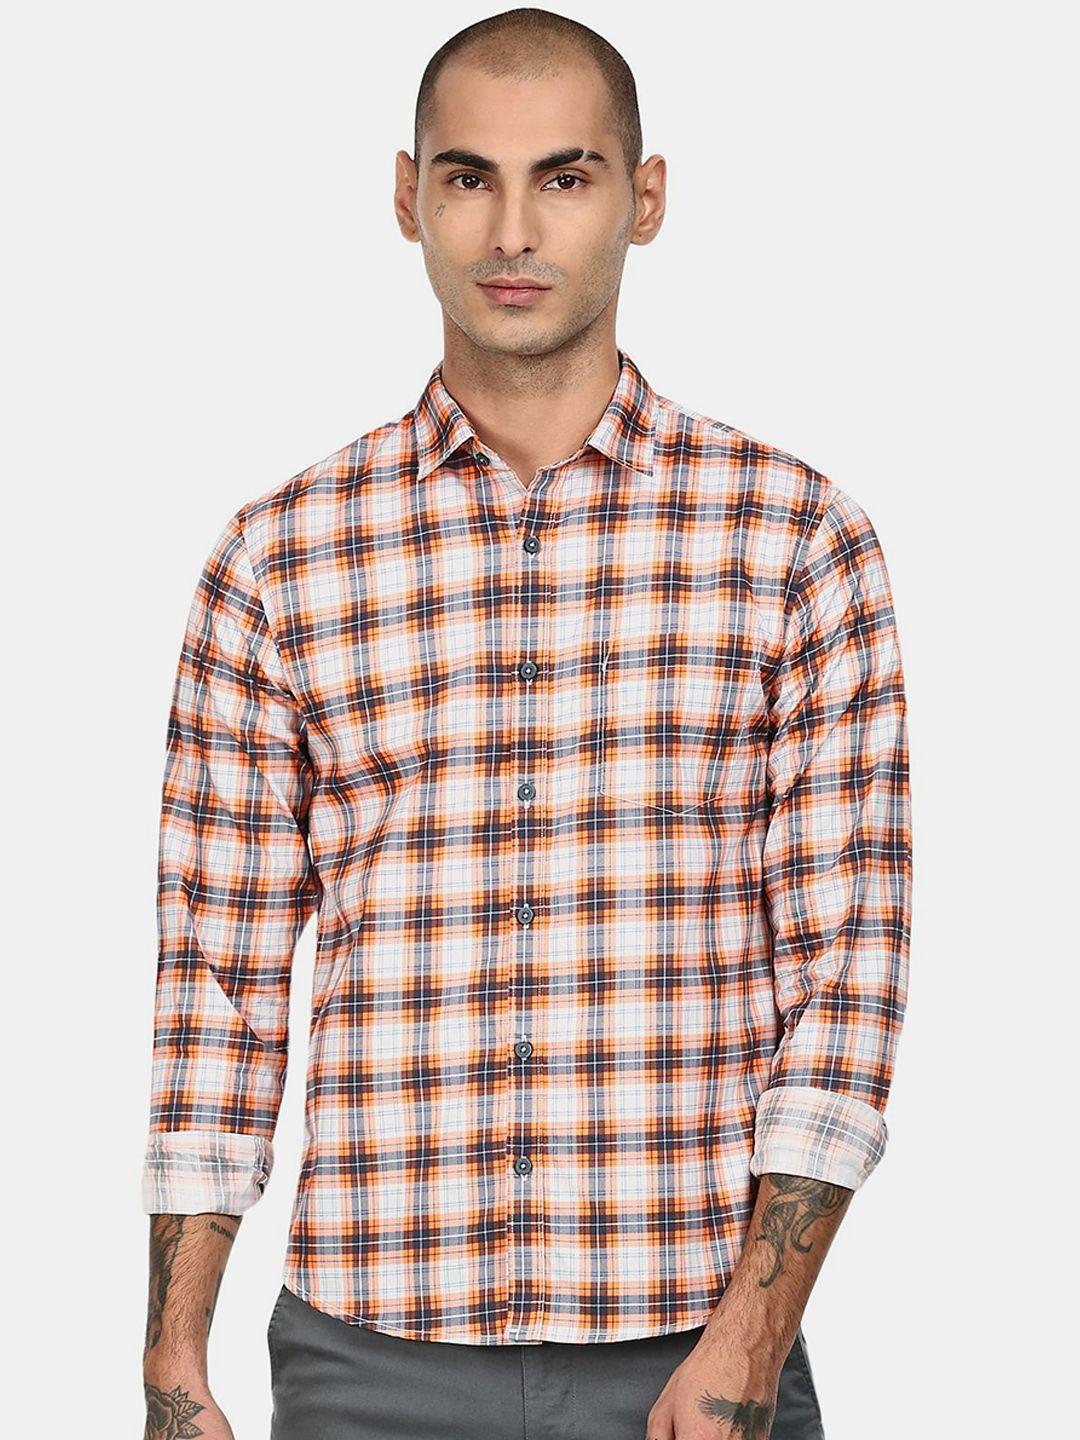 ruggers-men-orange-&-off-white-checked-cotton-casual-shirt